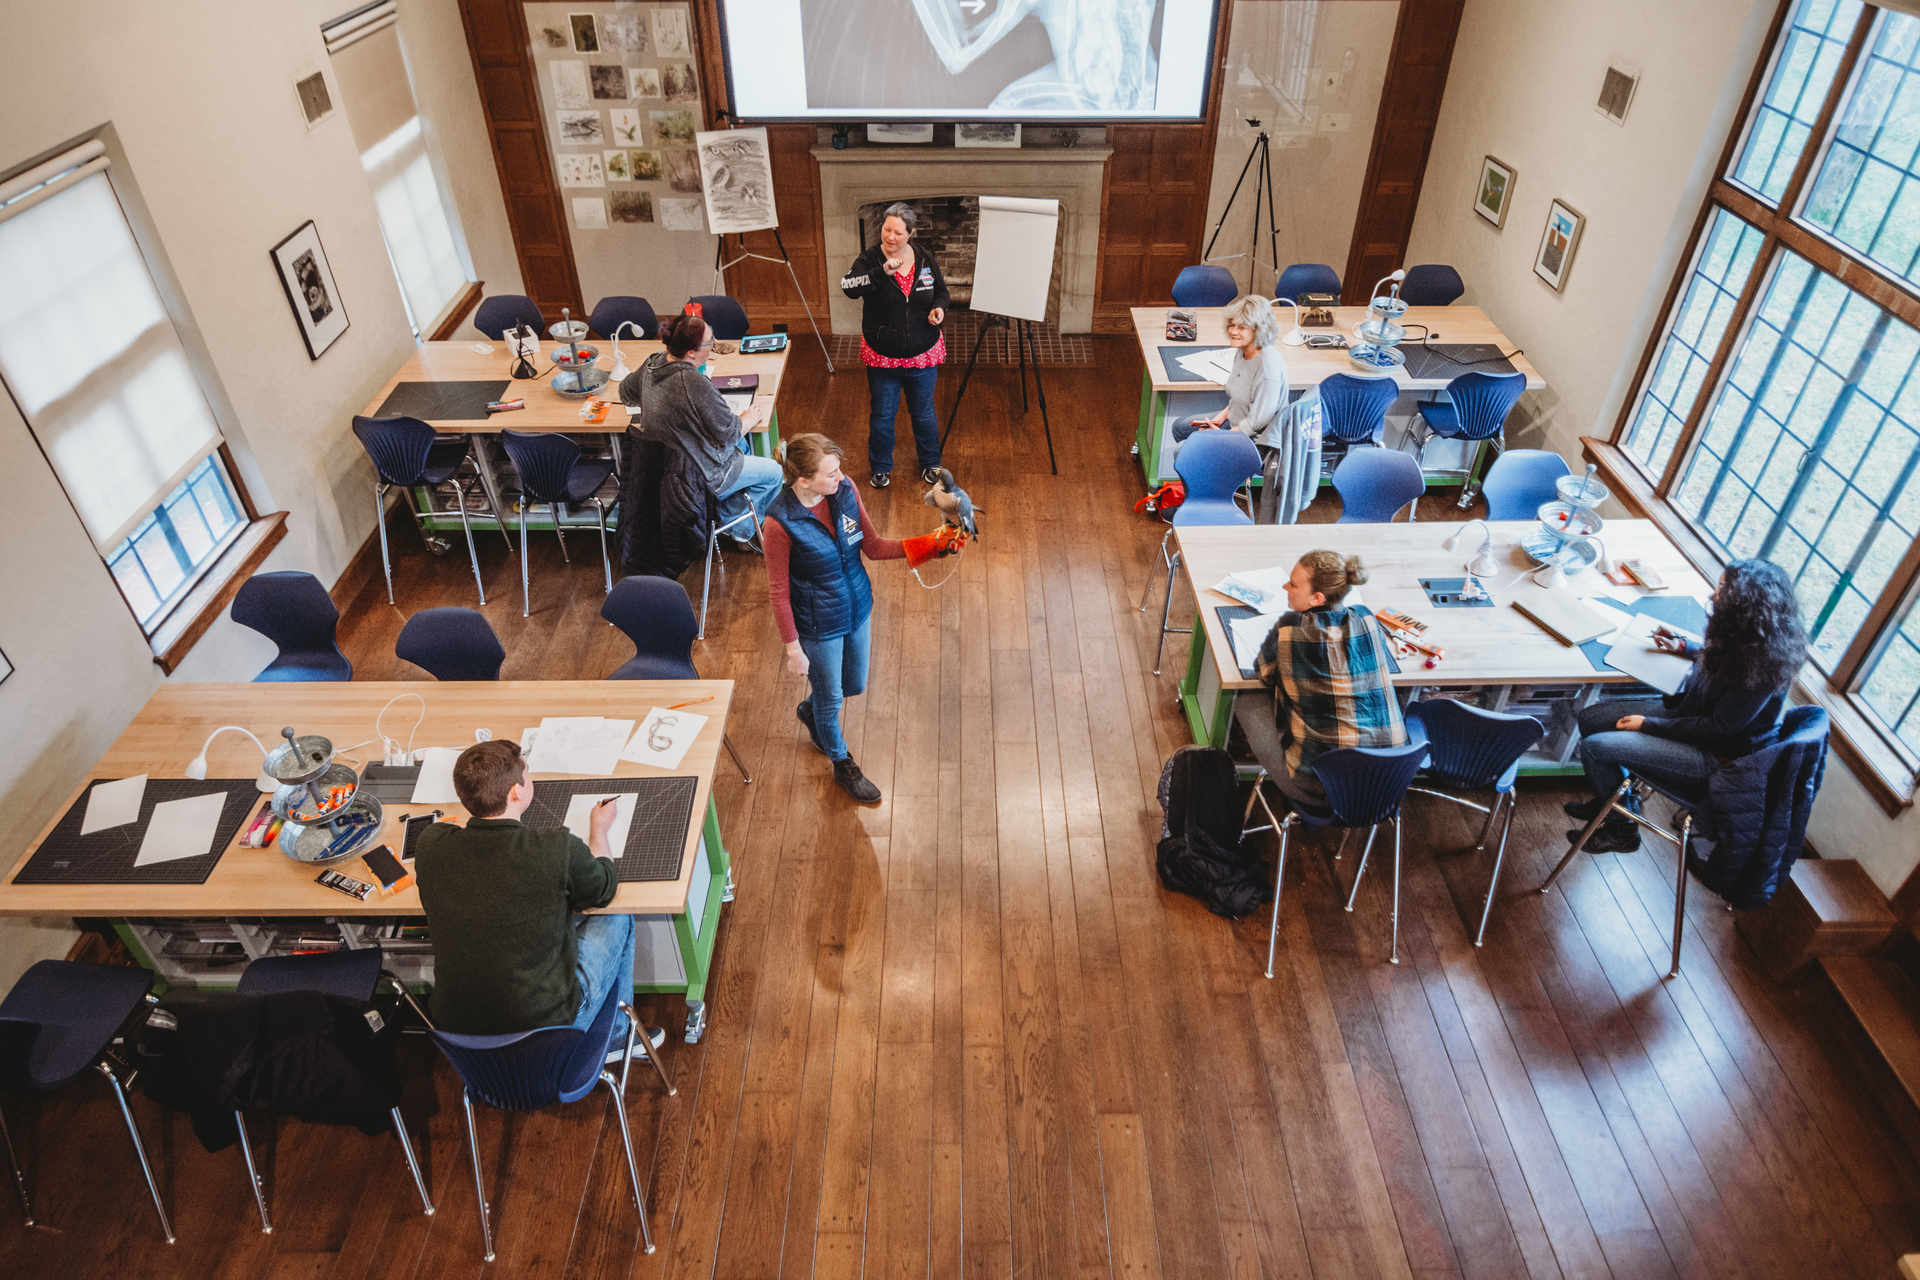 Overhead view of students in an art class